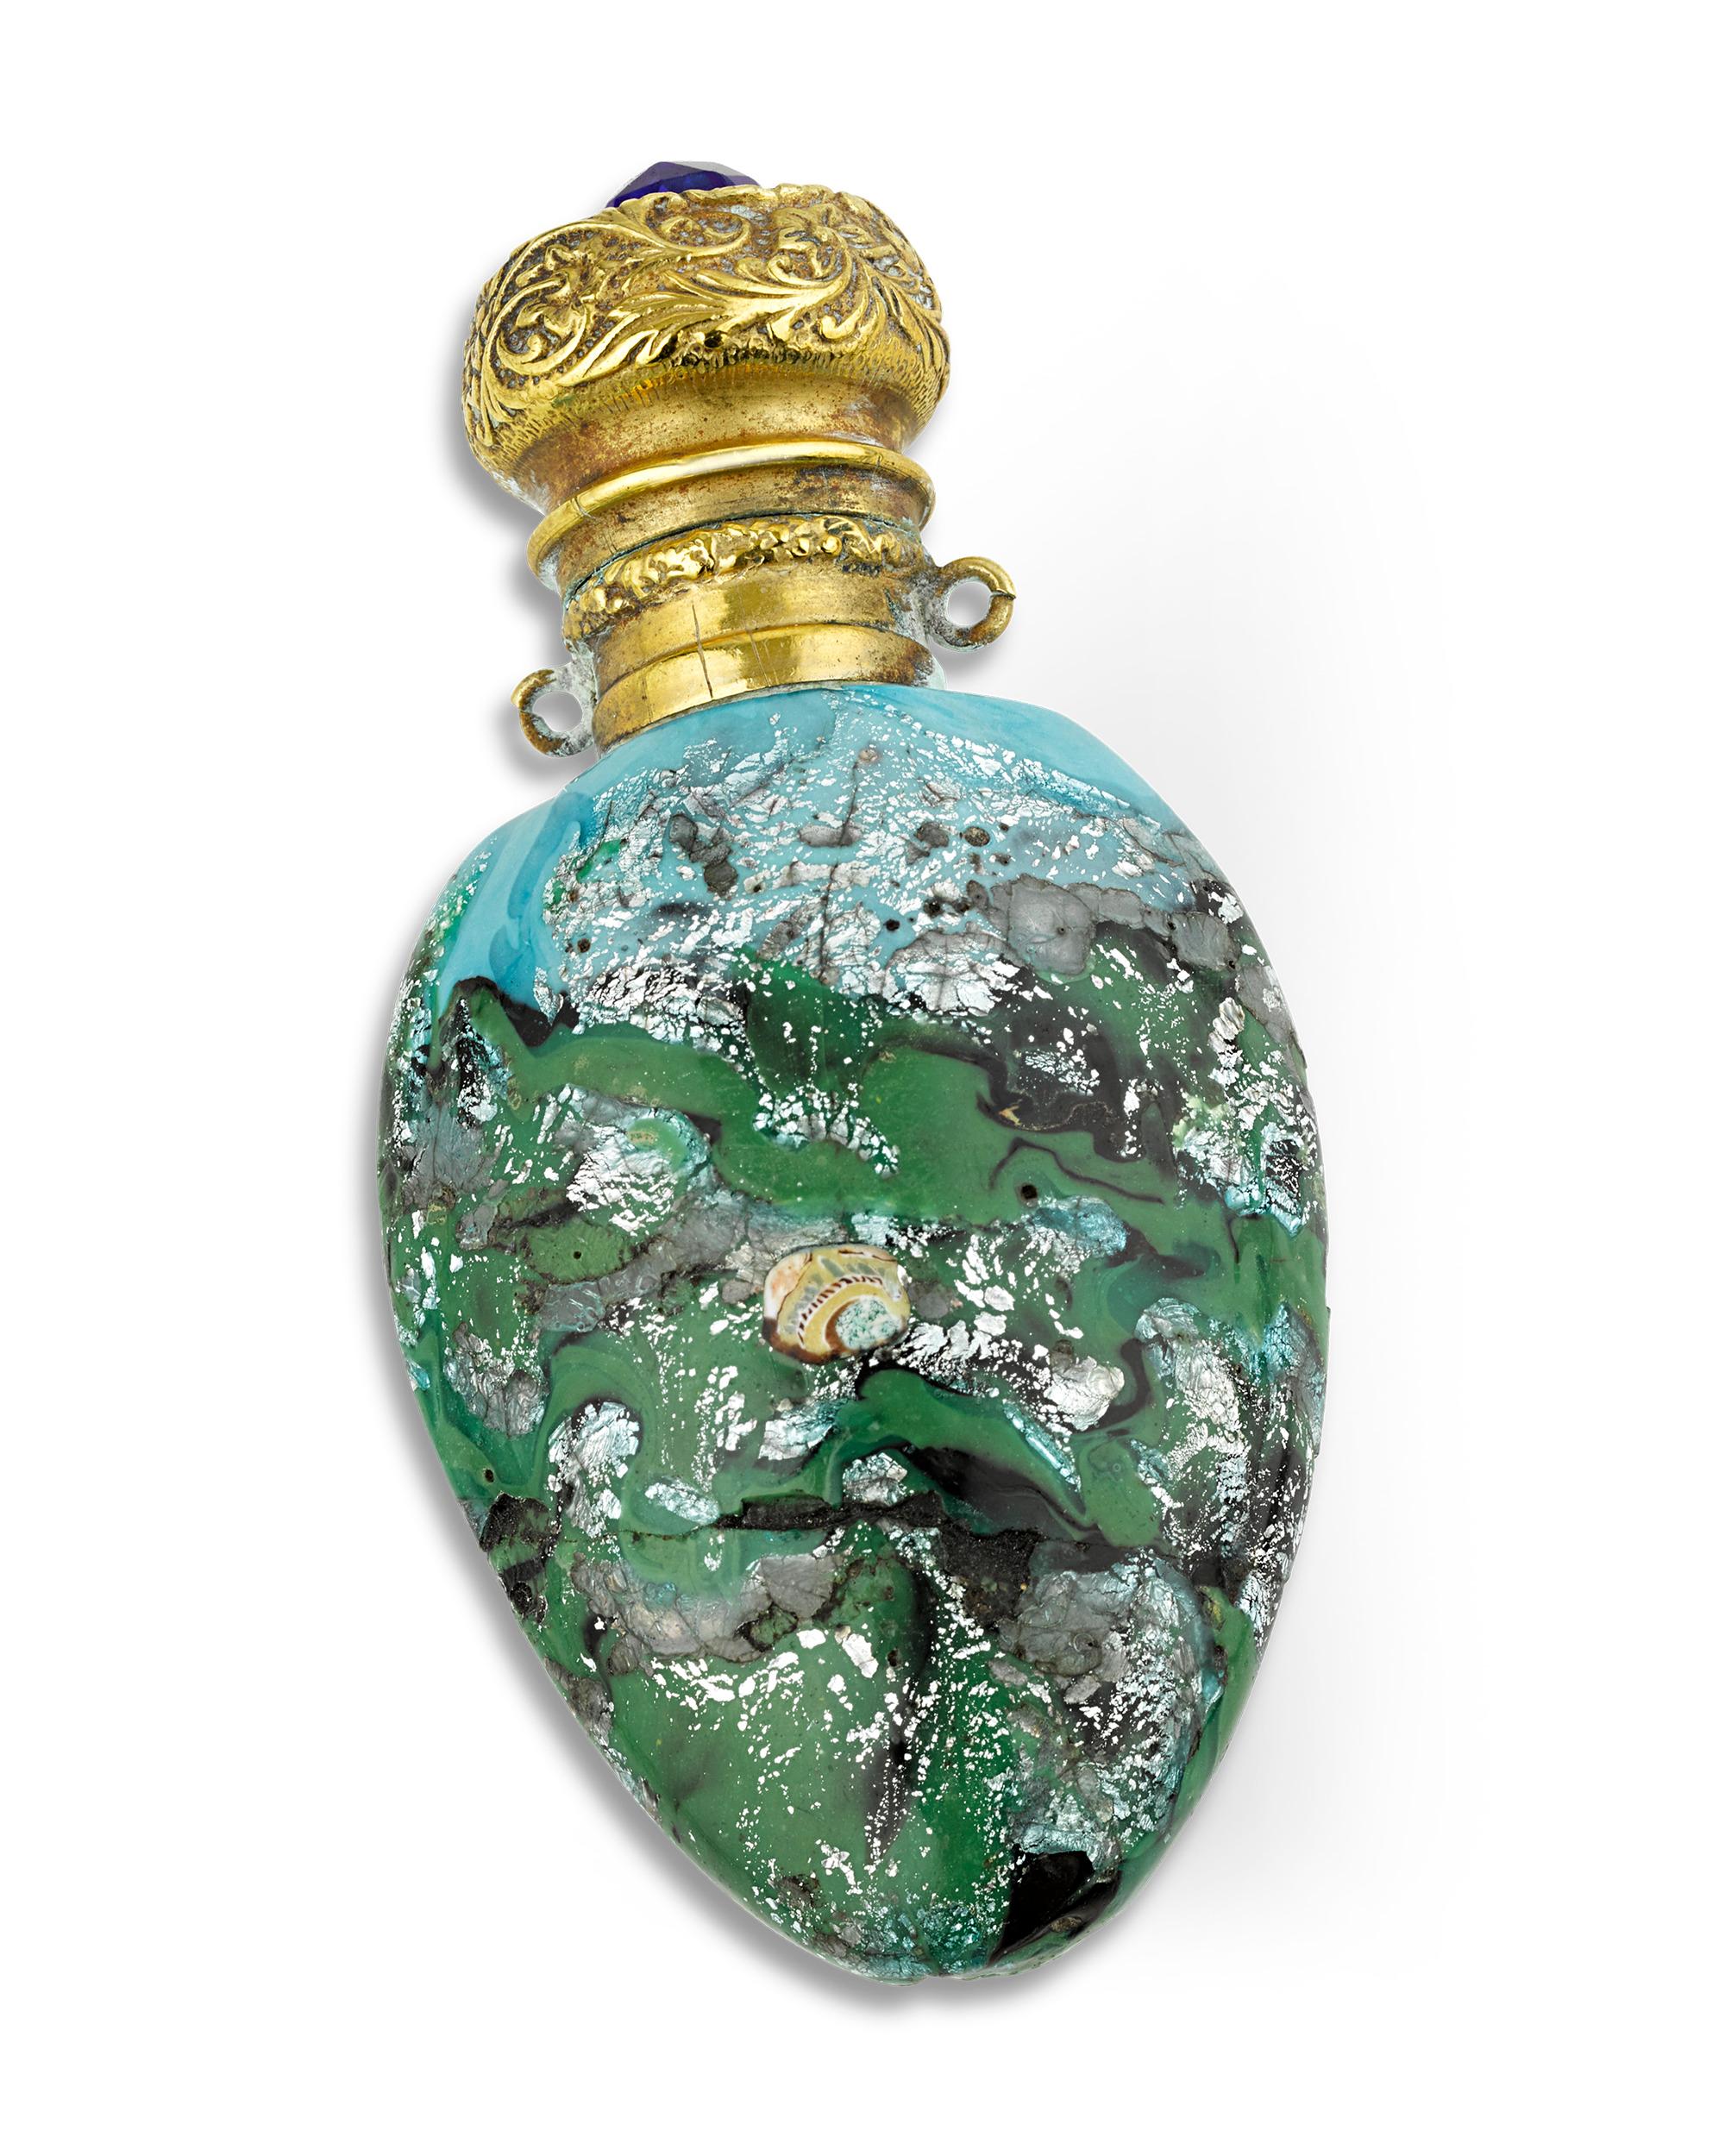 Colorful segments of murrine glass dot the surface of this marbled glass perfume bottle. Swirls of blues, greens and silvers display the skill of the famed Venetian glass masters.